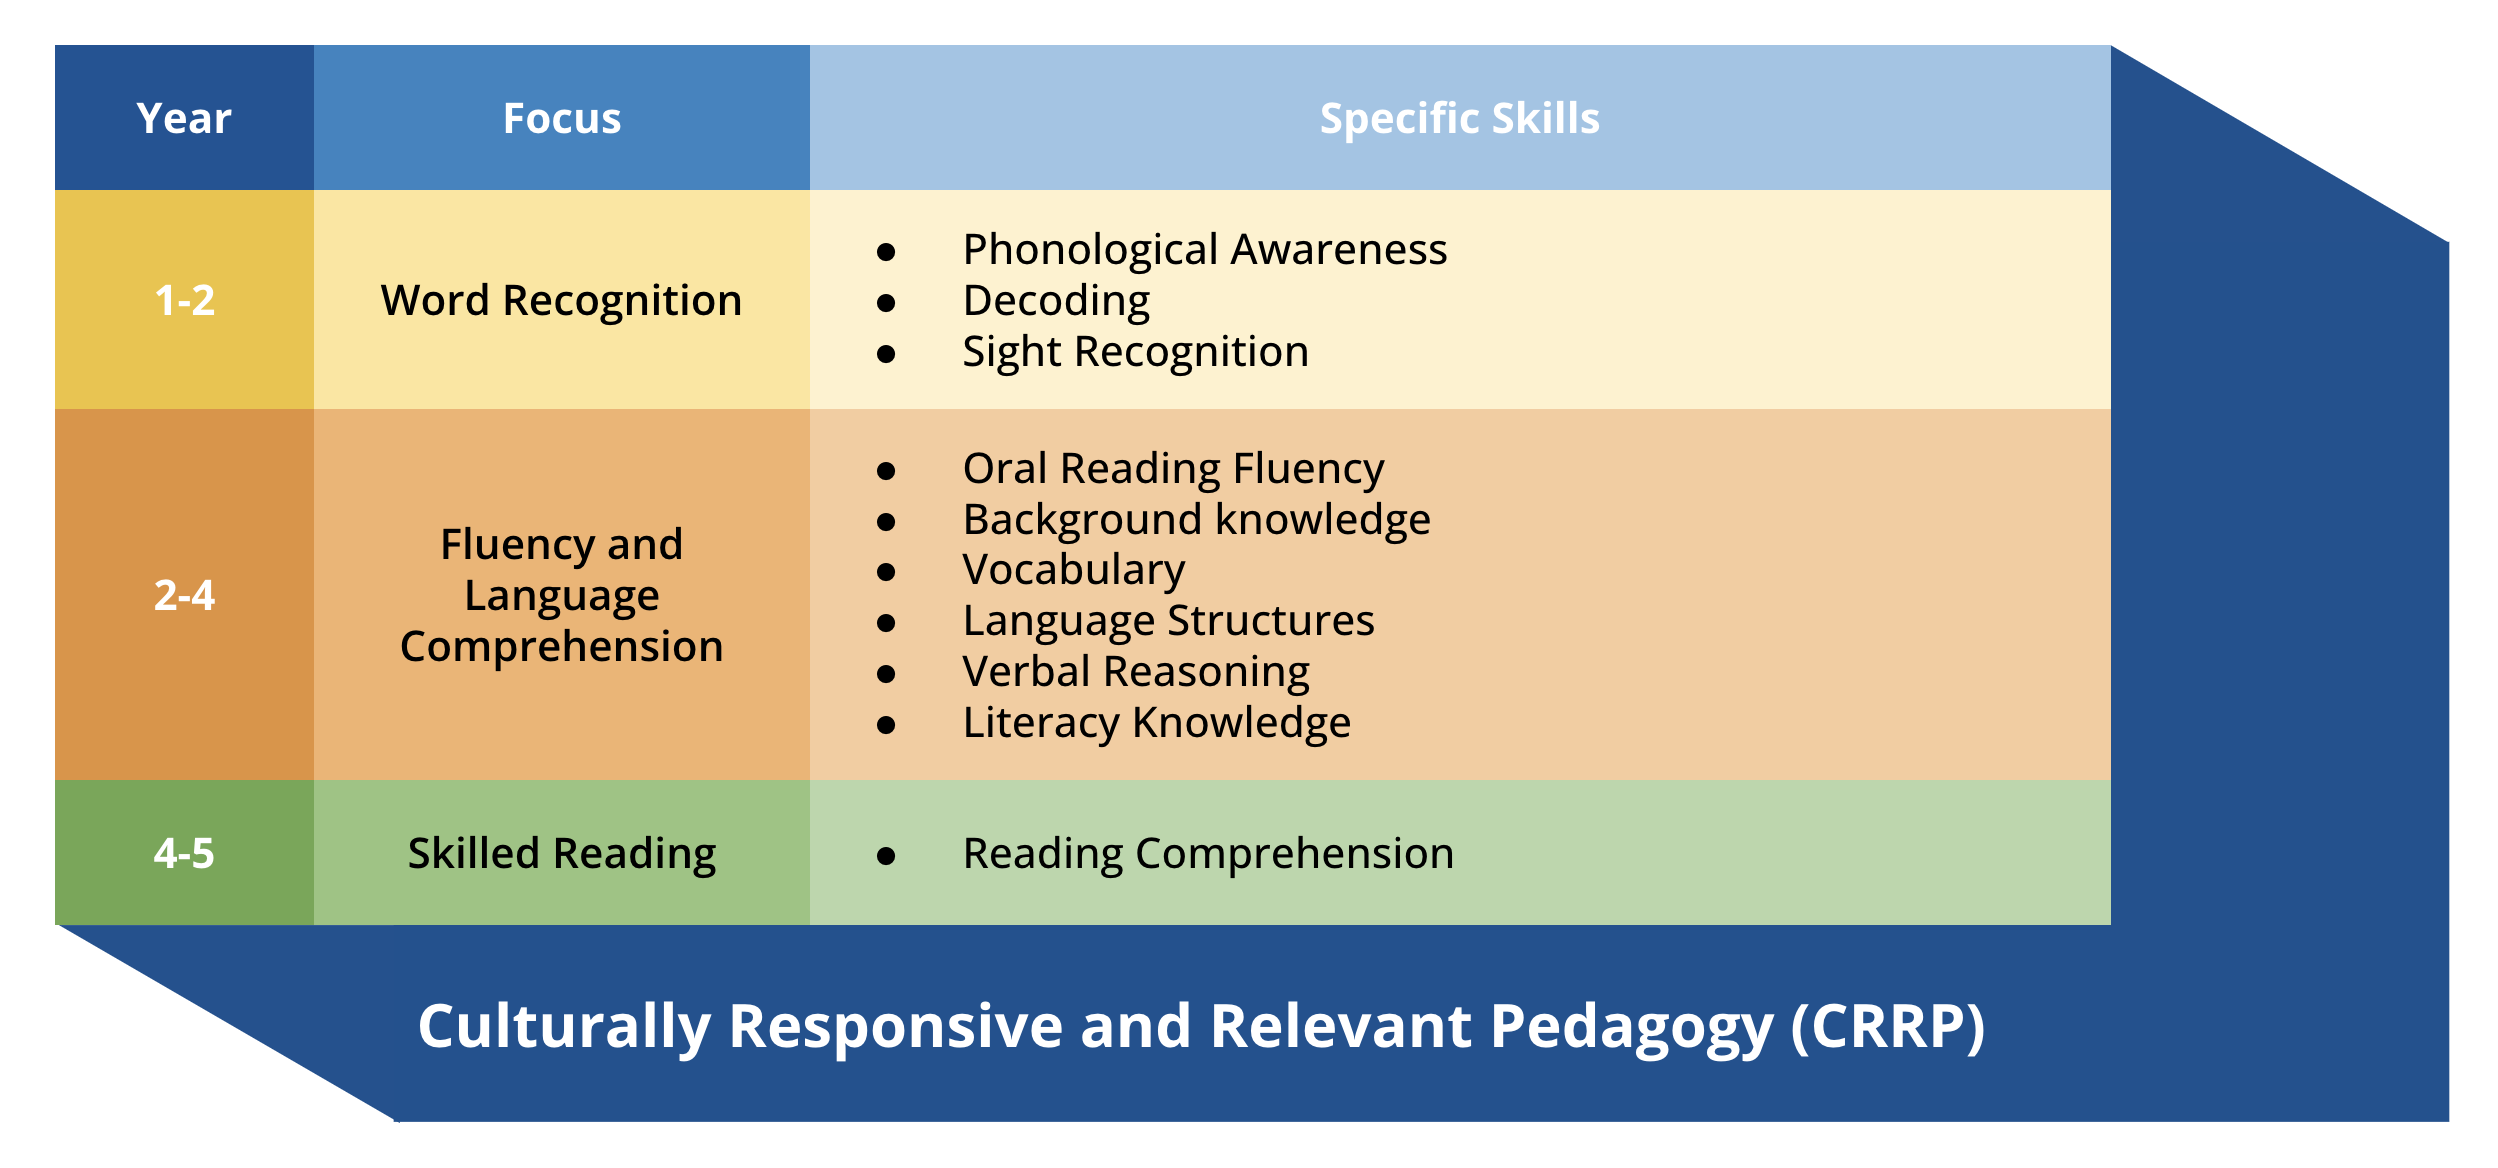 The focus for years one and two of the Structured Literacy Multi-Year Plan is word recognition. The specific skills include phonological awareness, decoding and sight recognition. For years two to four, the focus is on fluency and language comprehension. The specific skills include oral reading fluency, background knowledge, vocabulary, language structures, verbal reasoning, literacy knowledge. For years four to five, the focus is on skilled reading. The specific skills include reading comprehension. Culturally responsive and relevant pedagogy is foundational to every component of this plan.